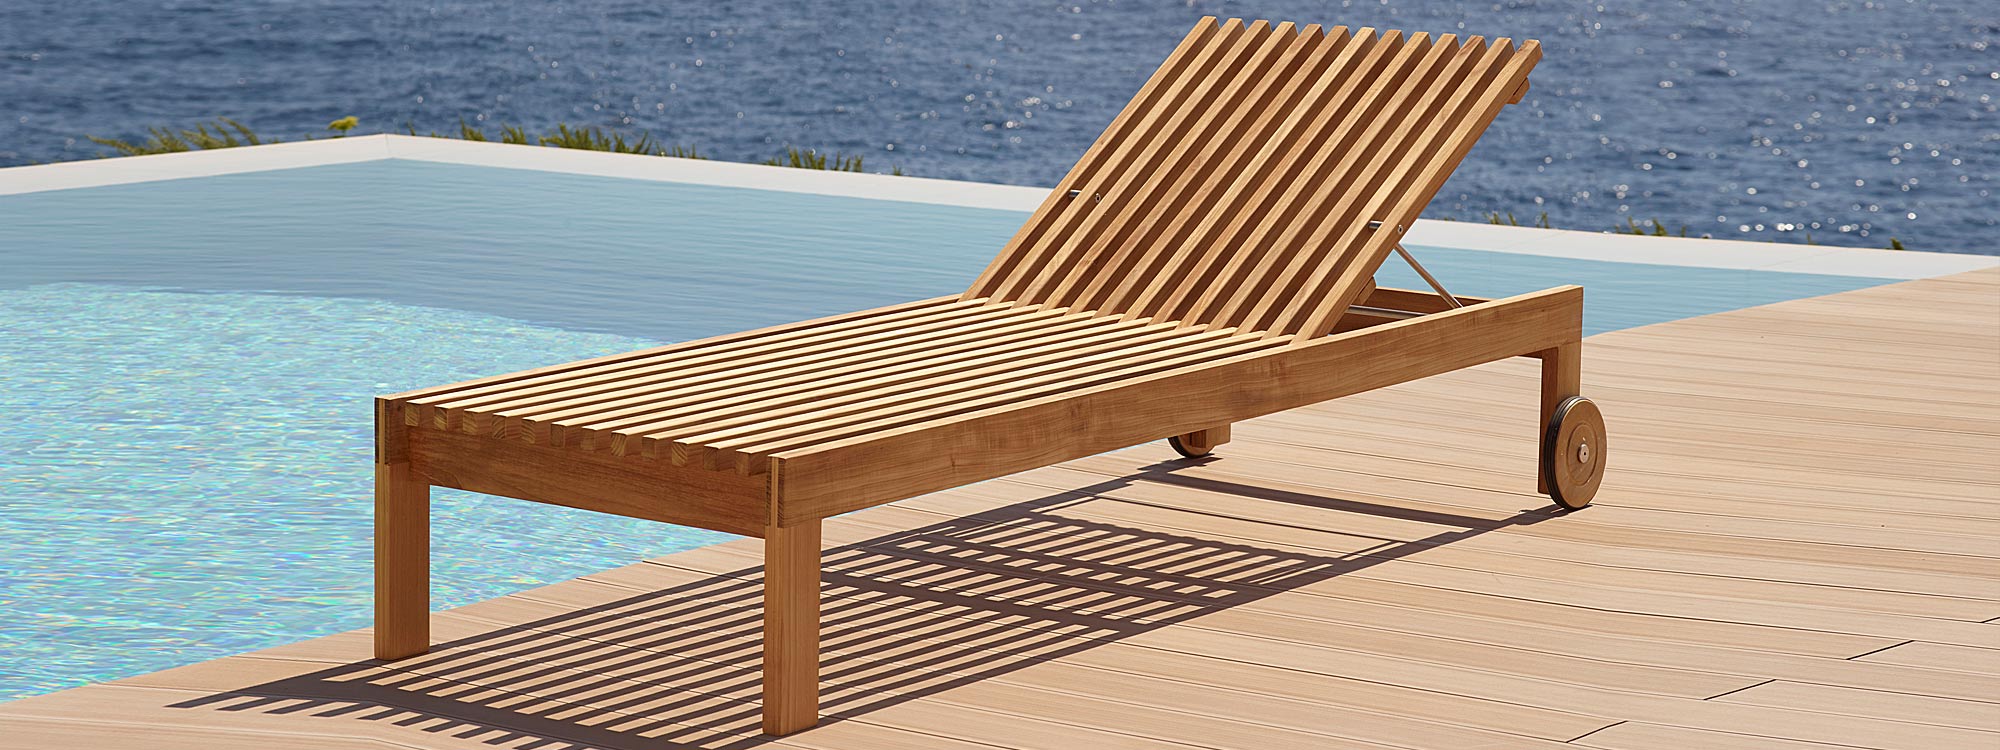 Image of Cane-line Amaze sun bed by Cane-line, which is made in WWF certified teak hardwoodImage of Cane-line Amaze sun bed by Cane-line, which is made in WWF certified teak hardwood